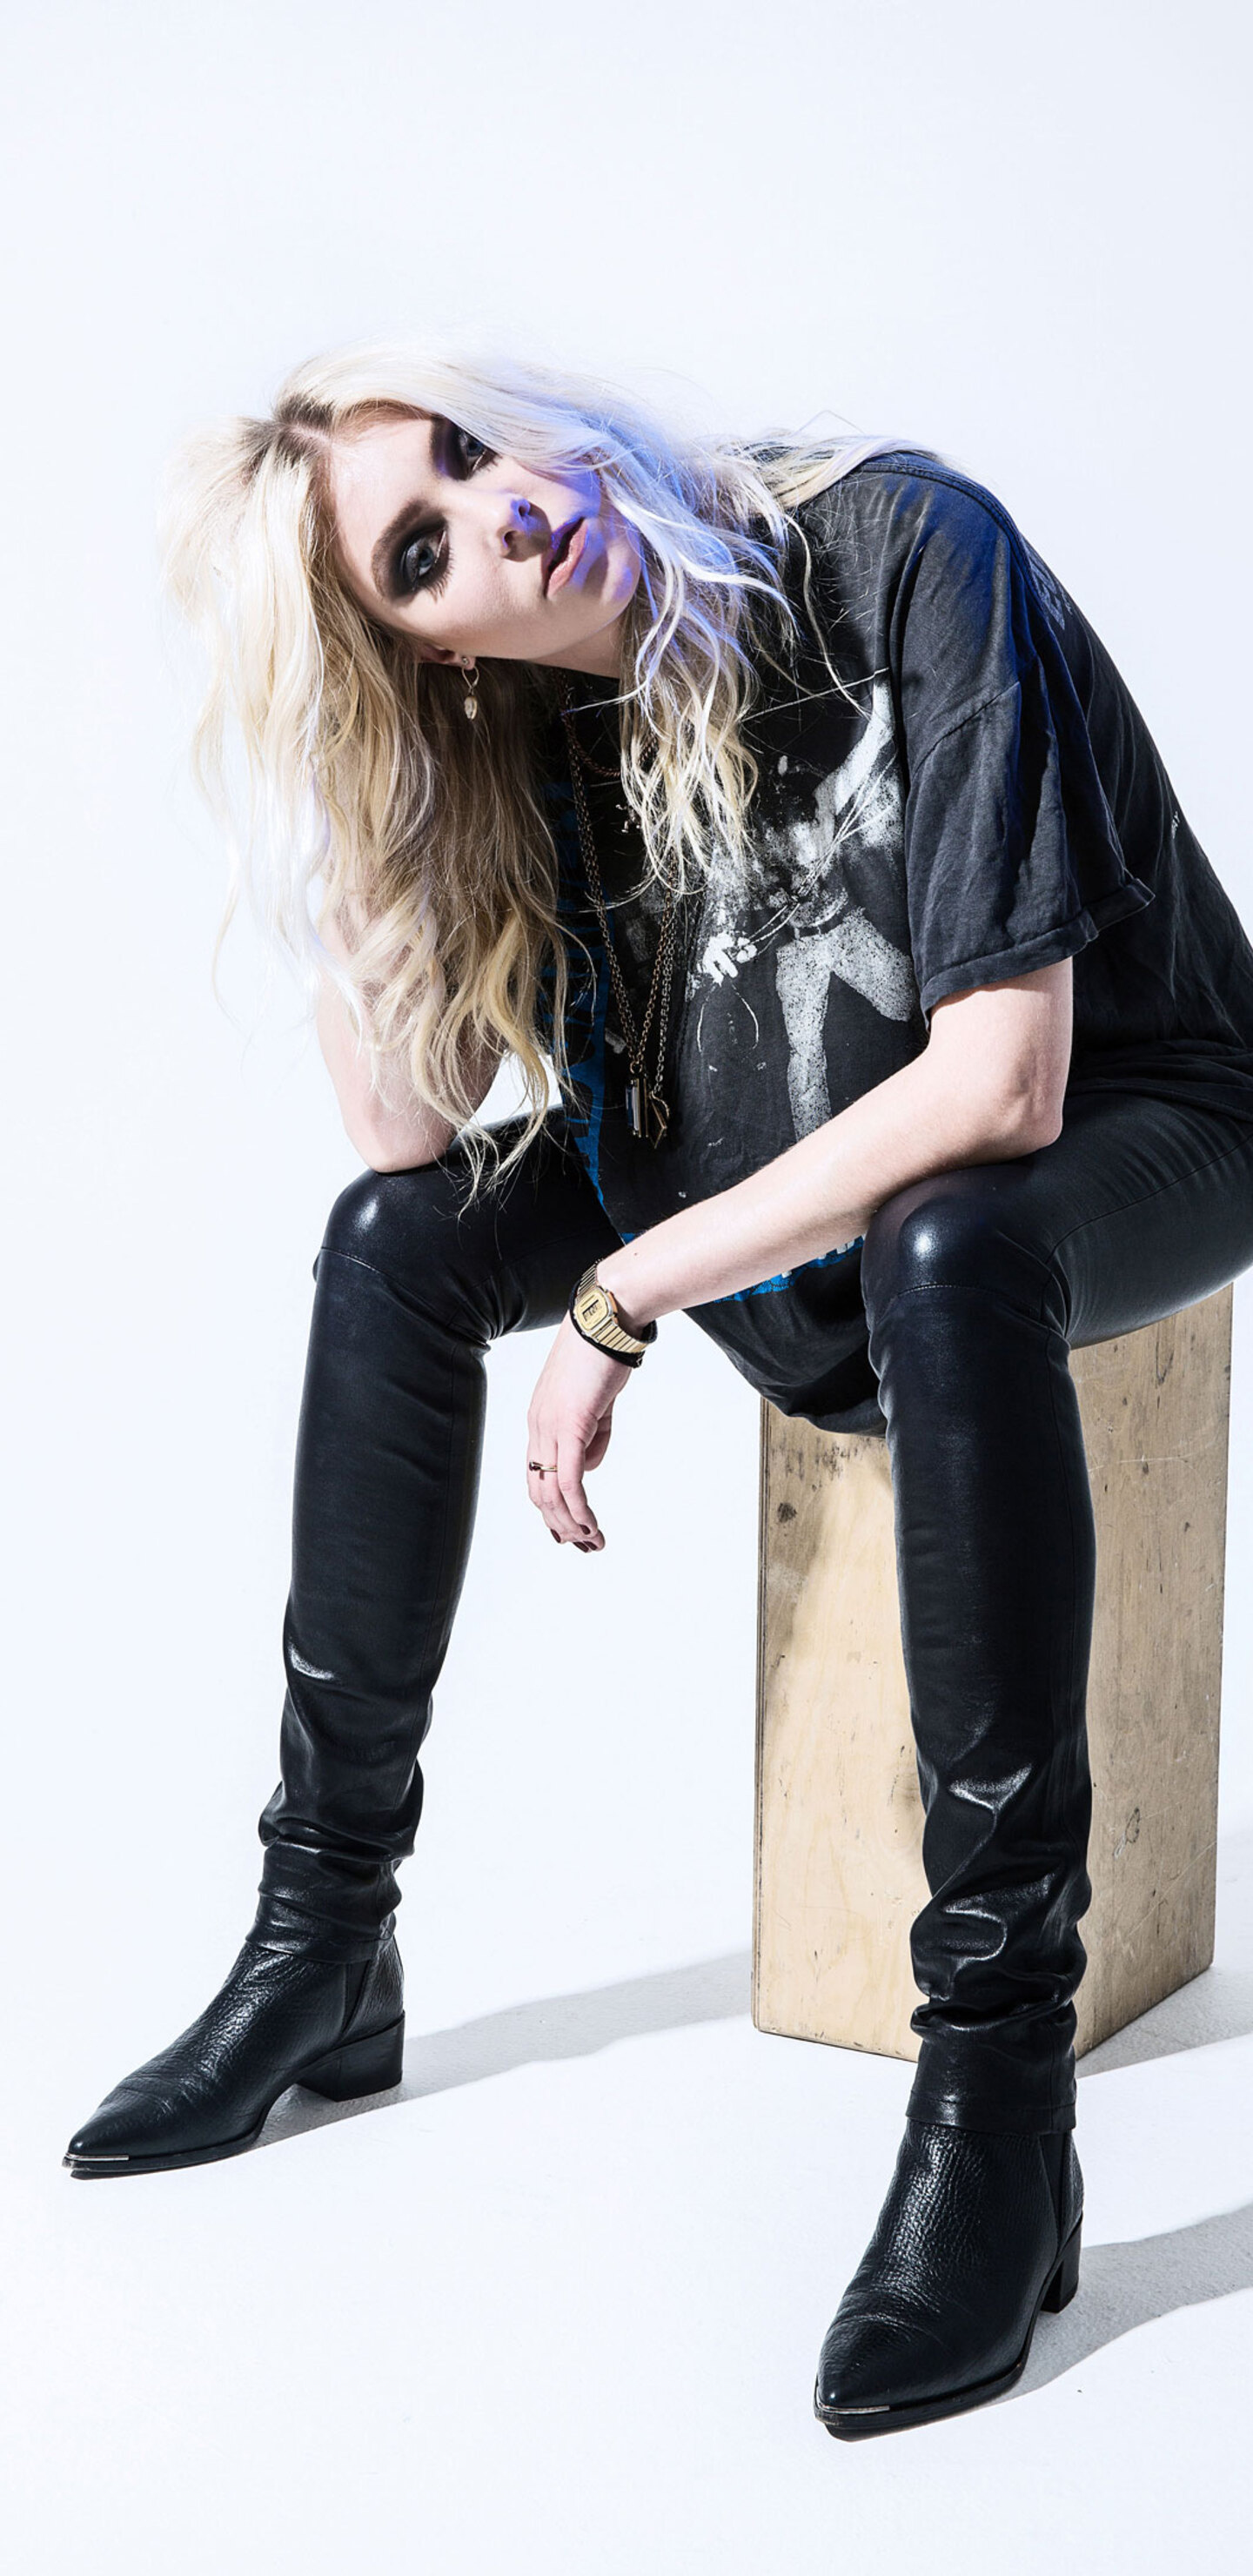 The Pretty Reckless, Taylor Momsen, Samsung Galaxy wallpapers, High-quality images, 1440x2960 HD Handy